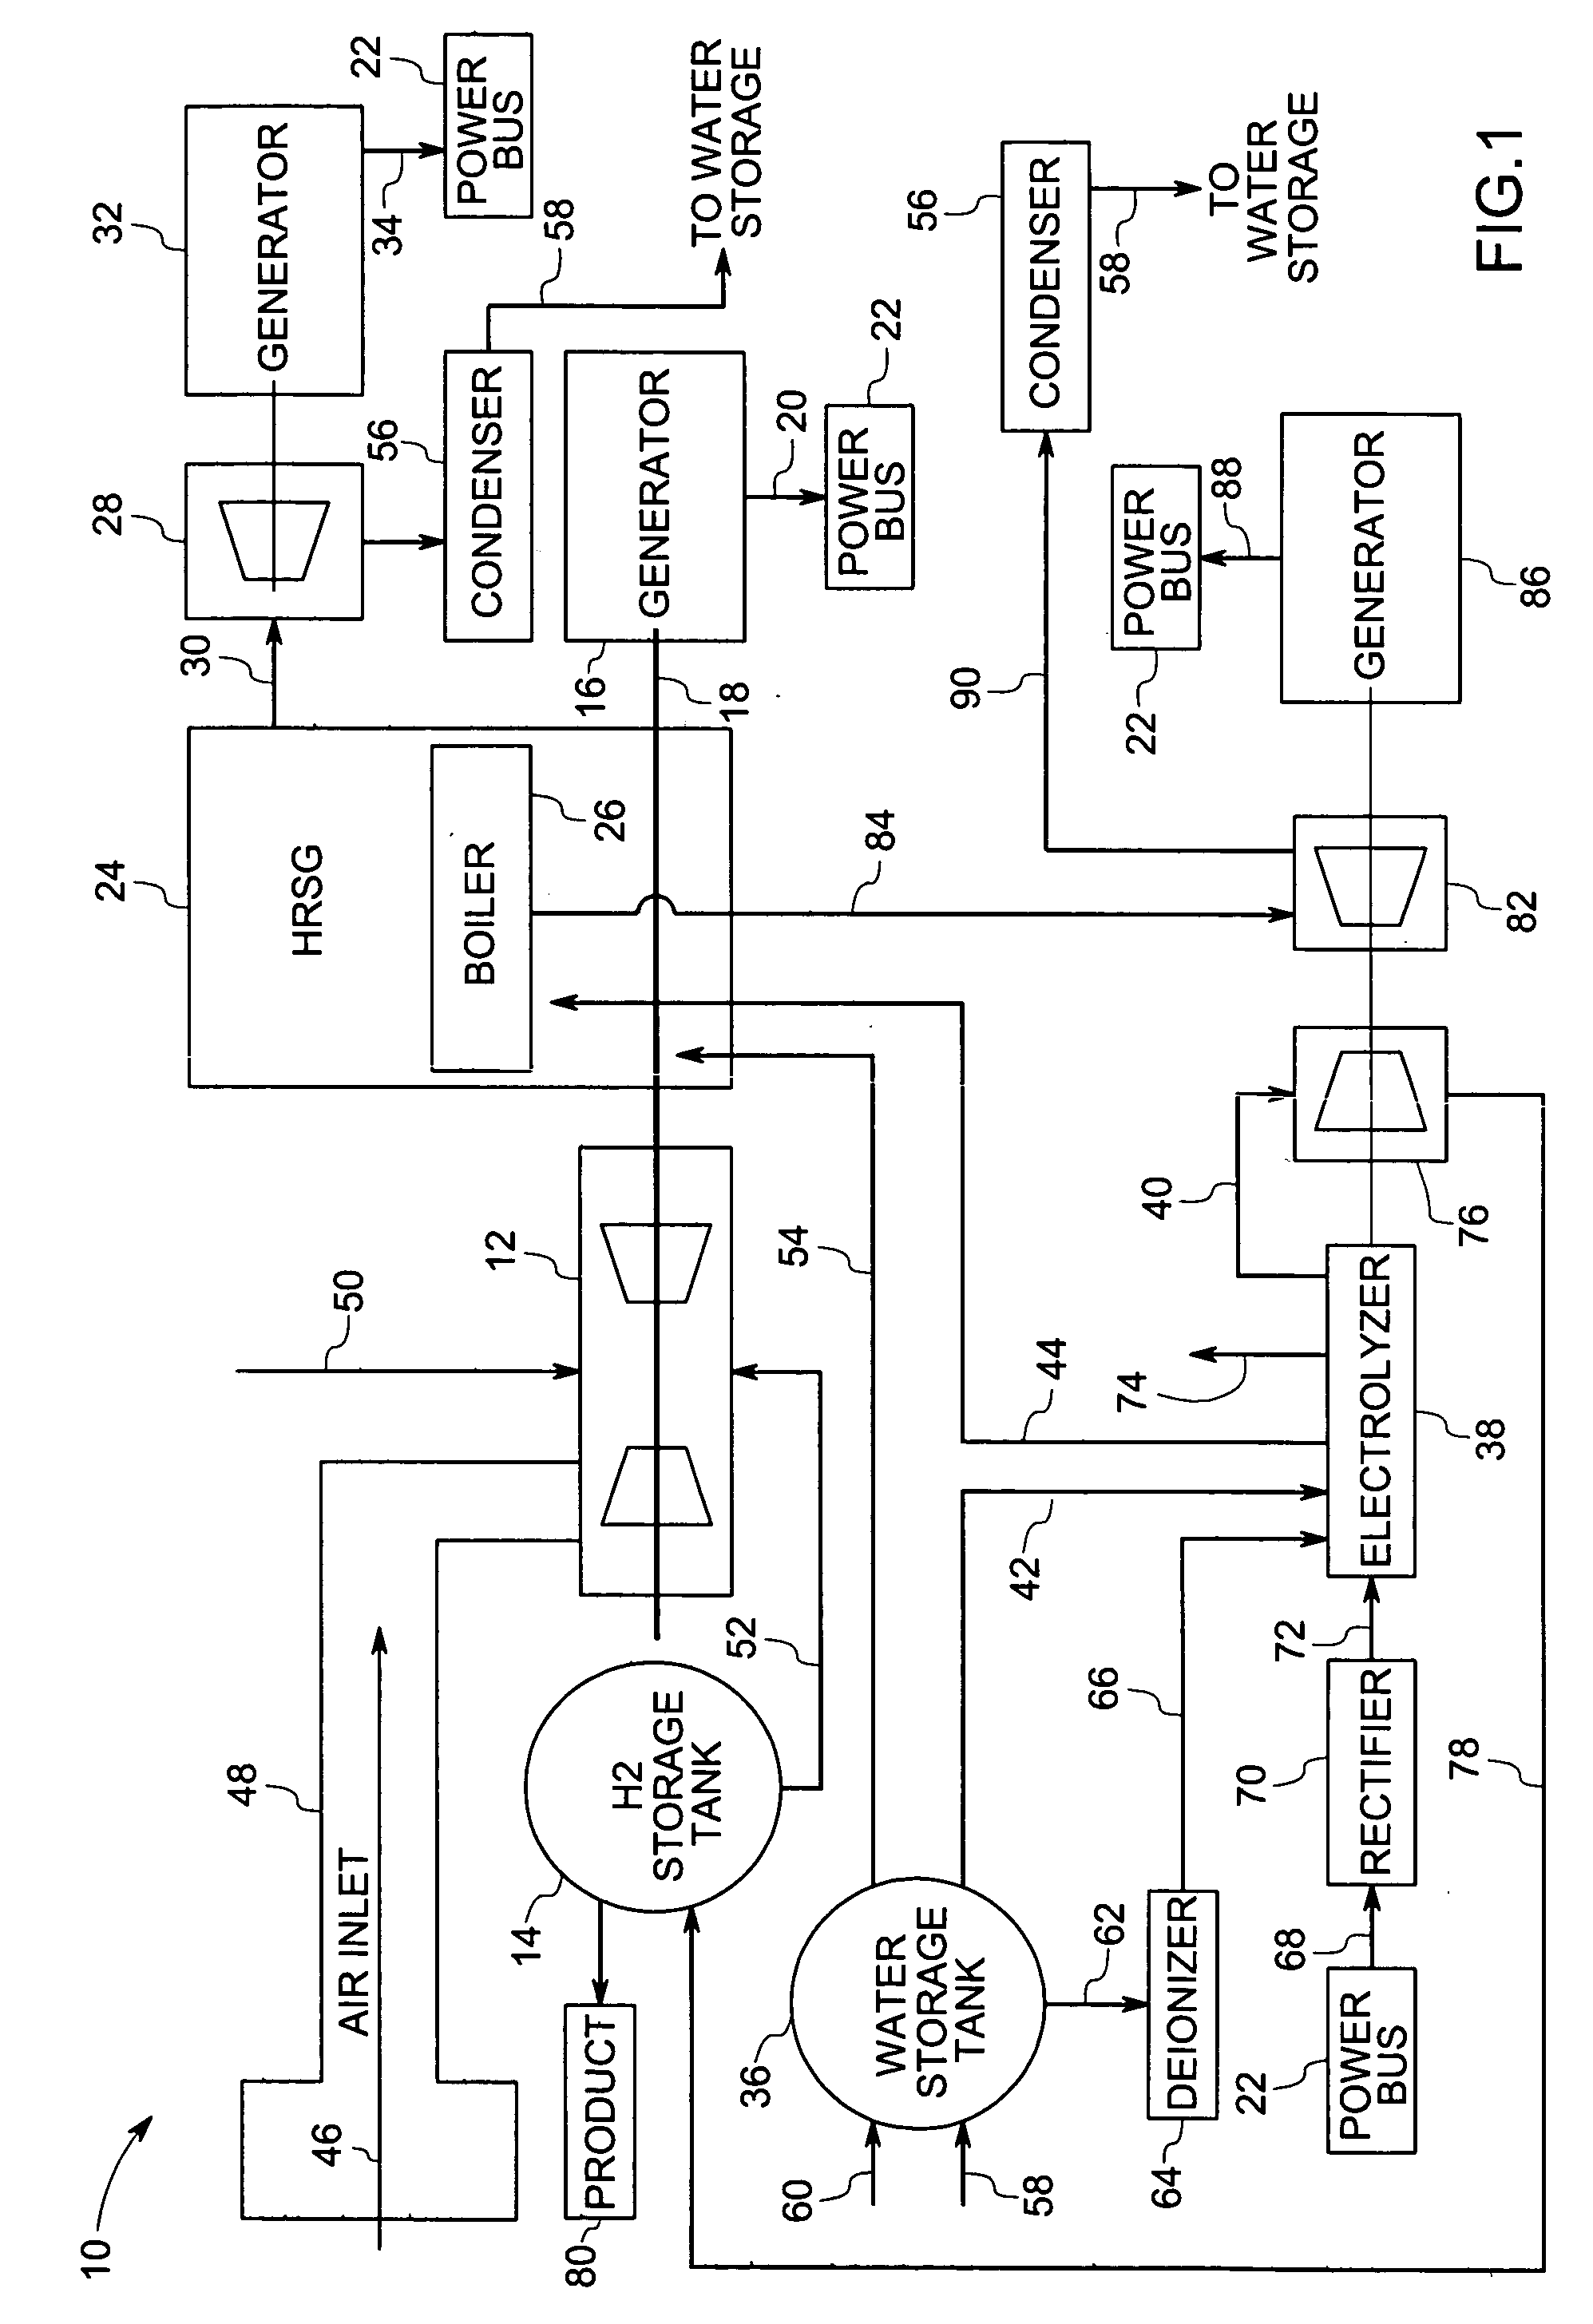 Power generation system and method of operating same